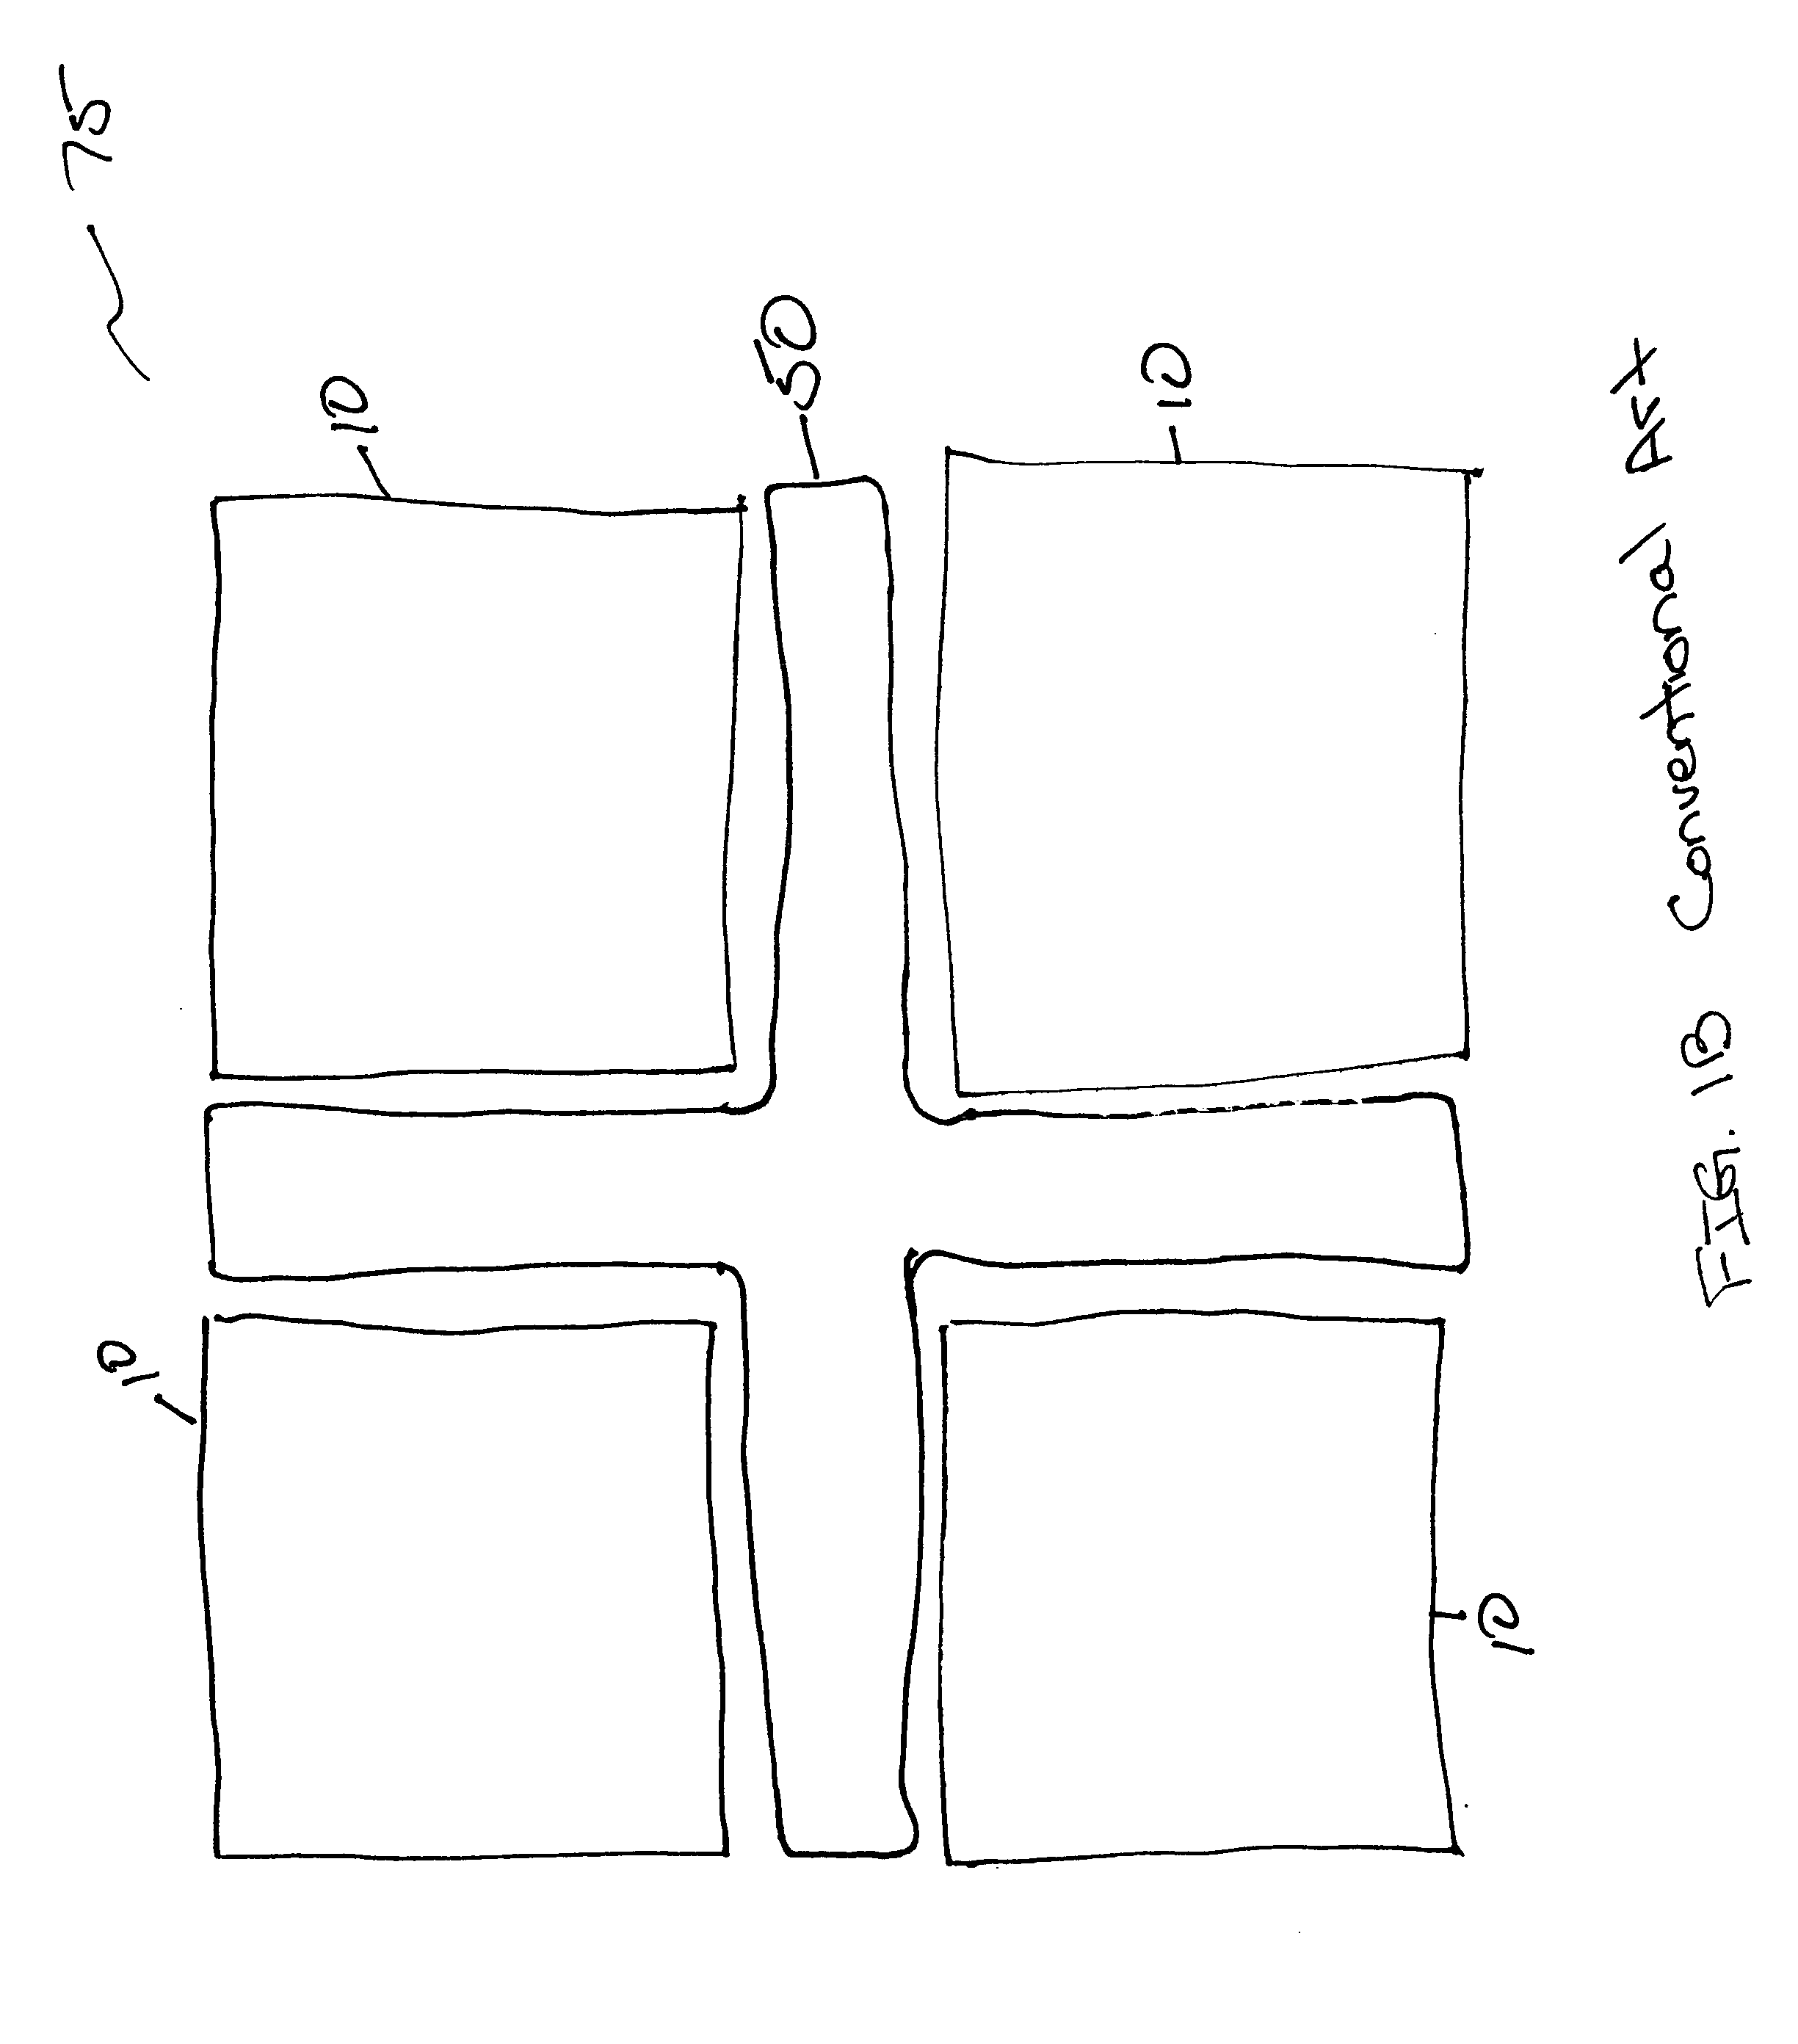 Nuclear reactor components including material layers to reduce enhanced corrosion on zirconium alloys used in fuel assemblies and methods thereof